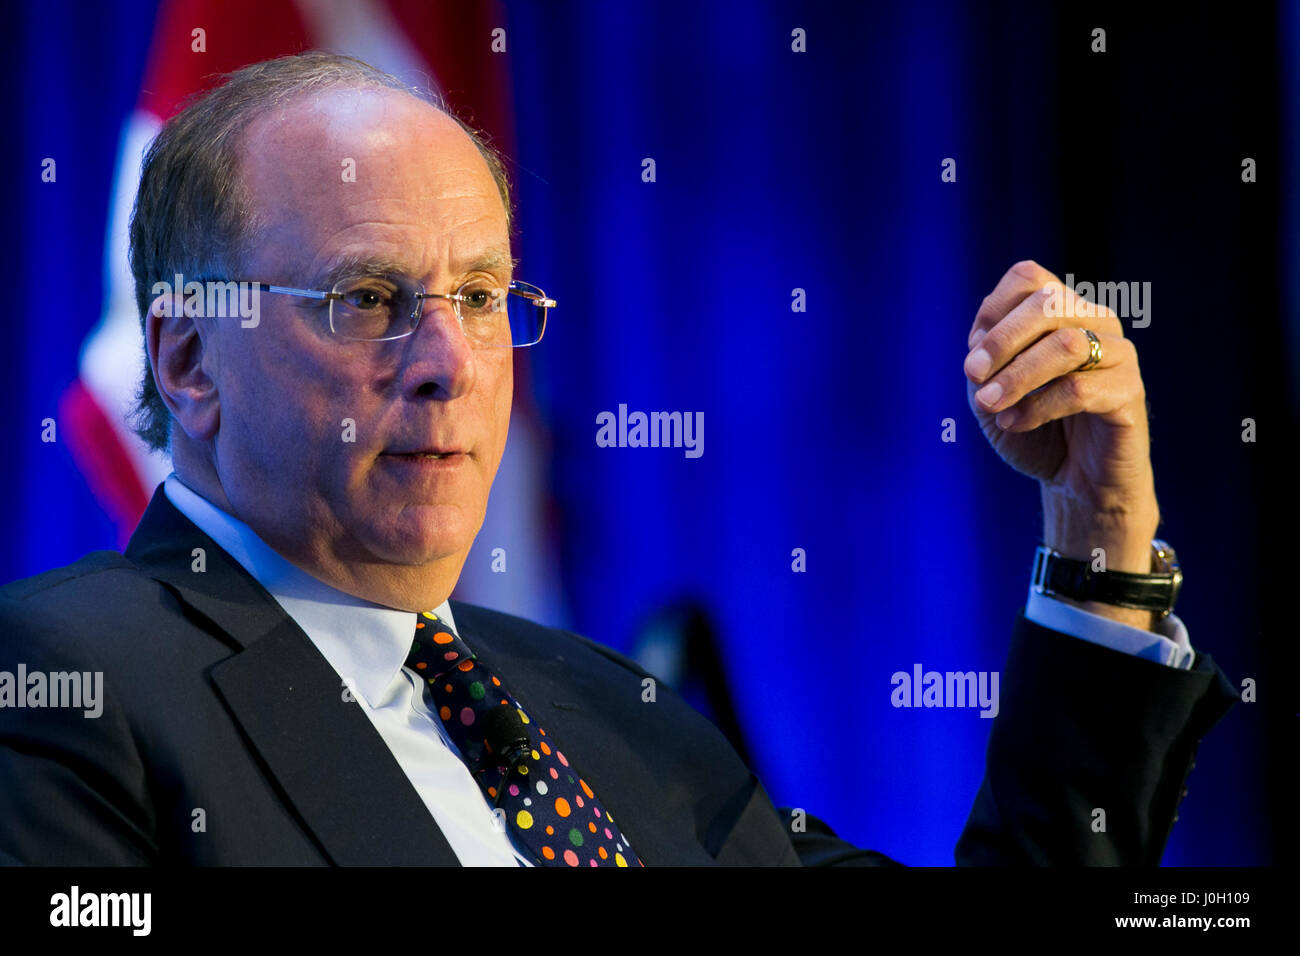 Washington, DC, USA. 12th Apr, 2017. Laurence 'Larry' Fink, Chairman and Chief Executive Officer of BlackRock, Inc., speaks during an Economic Club of Washington event in Washington, DC, on April 12, 2017. Credit: Kristoffer Tripplaar/Alamy Live News Stock Photo